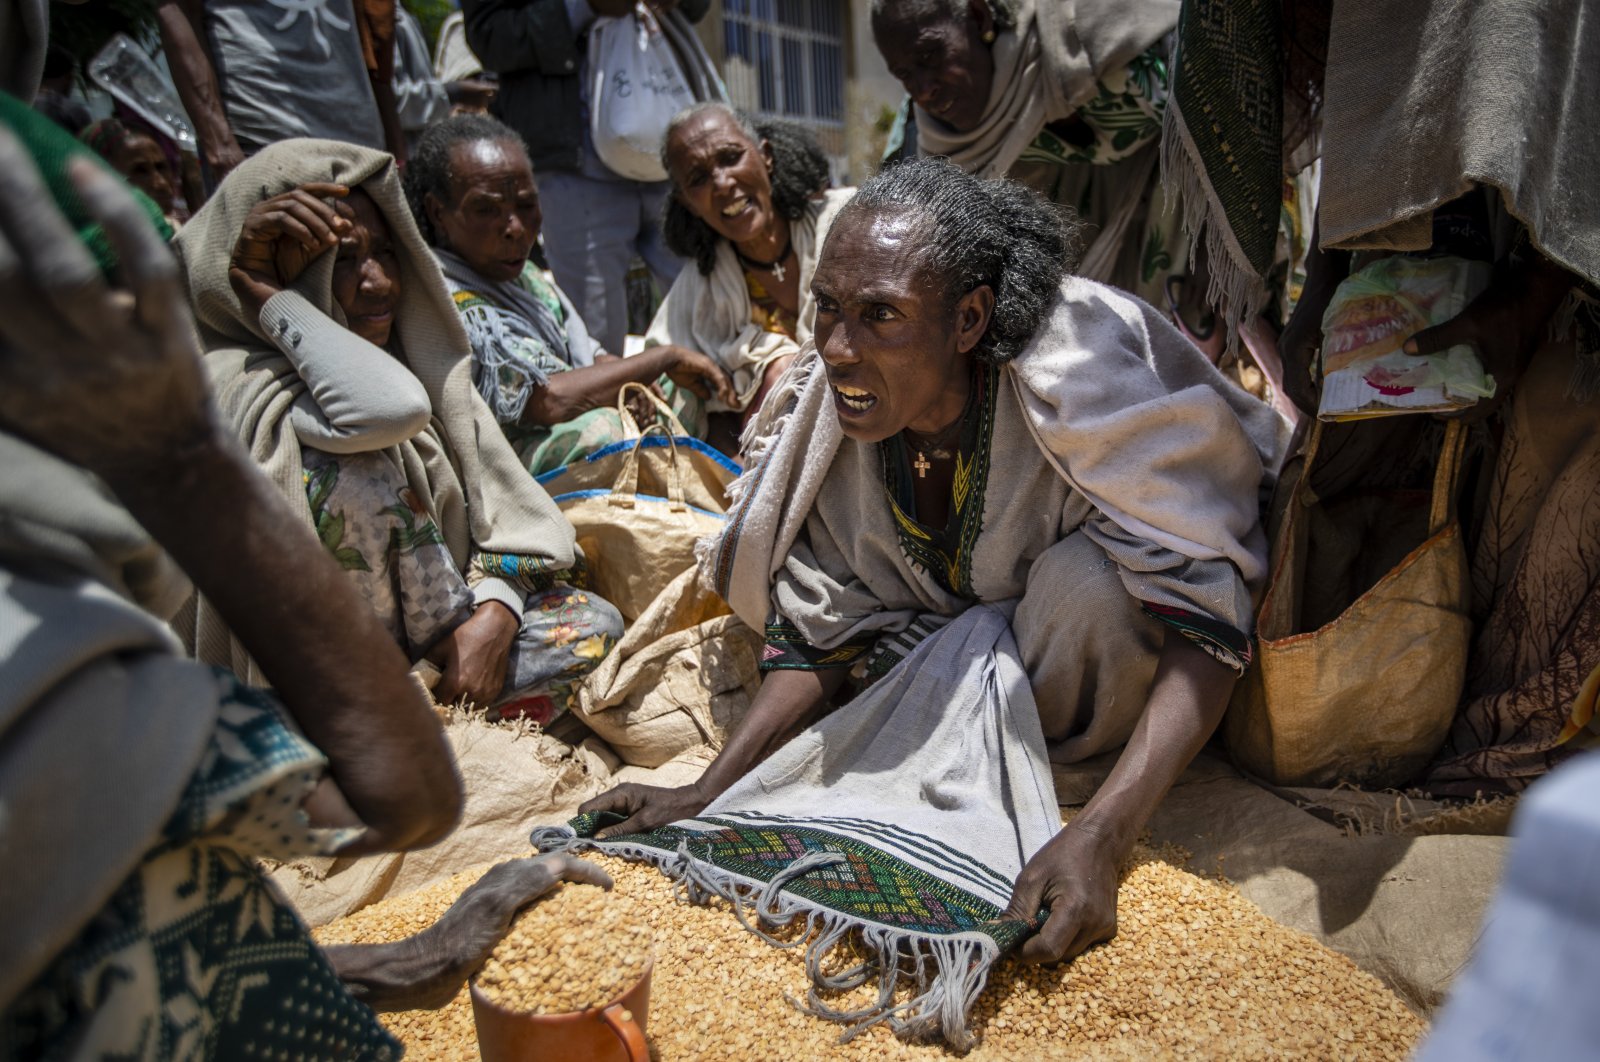 An Ethiopian woman argues with others over the allocation of yellow split peas after it was distributed by the Relief Society of Tigray in the town of Agula, in the Tigray region of northern Ethiopia, May 8, 2021. (AP Photo)